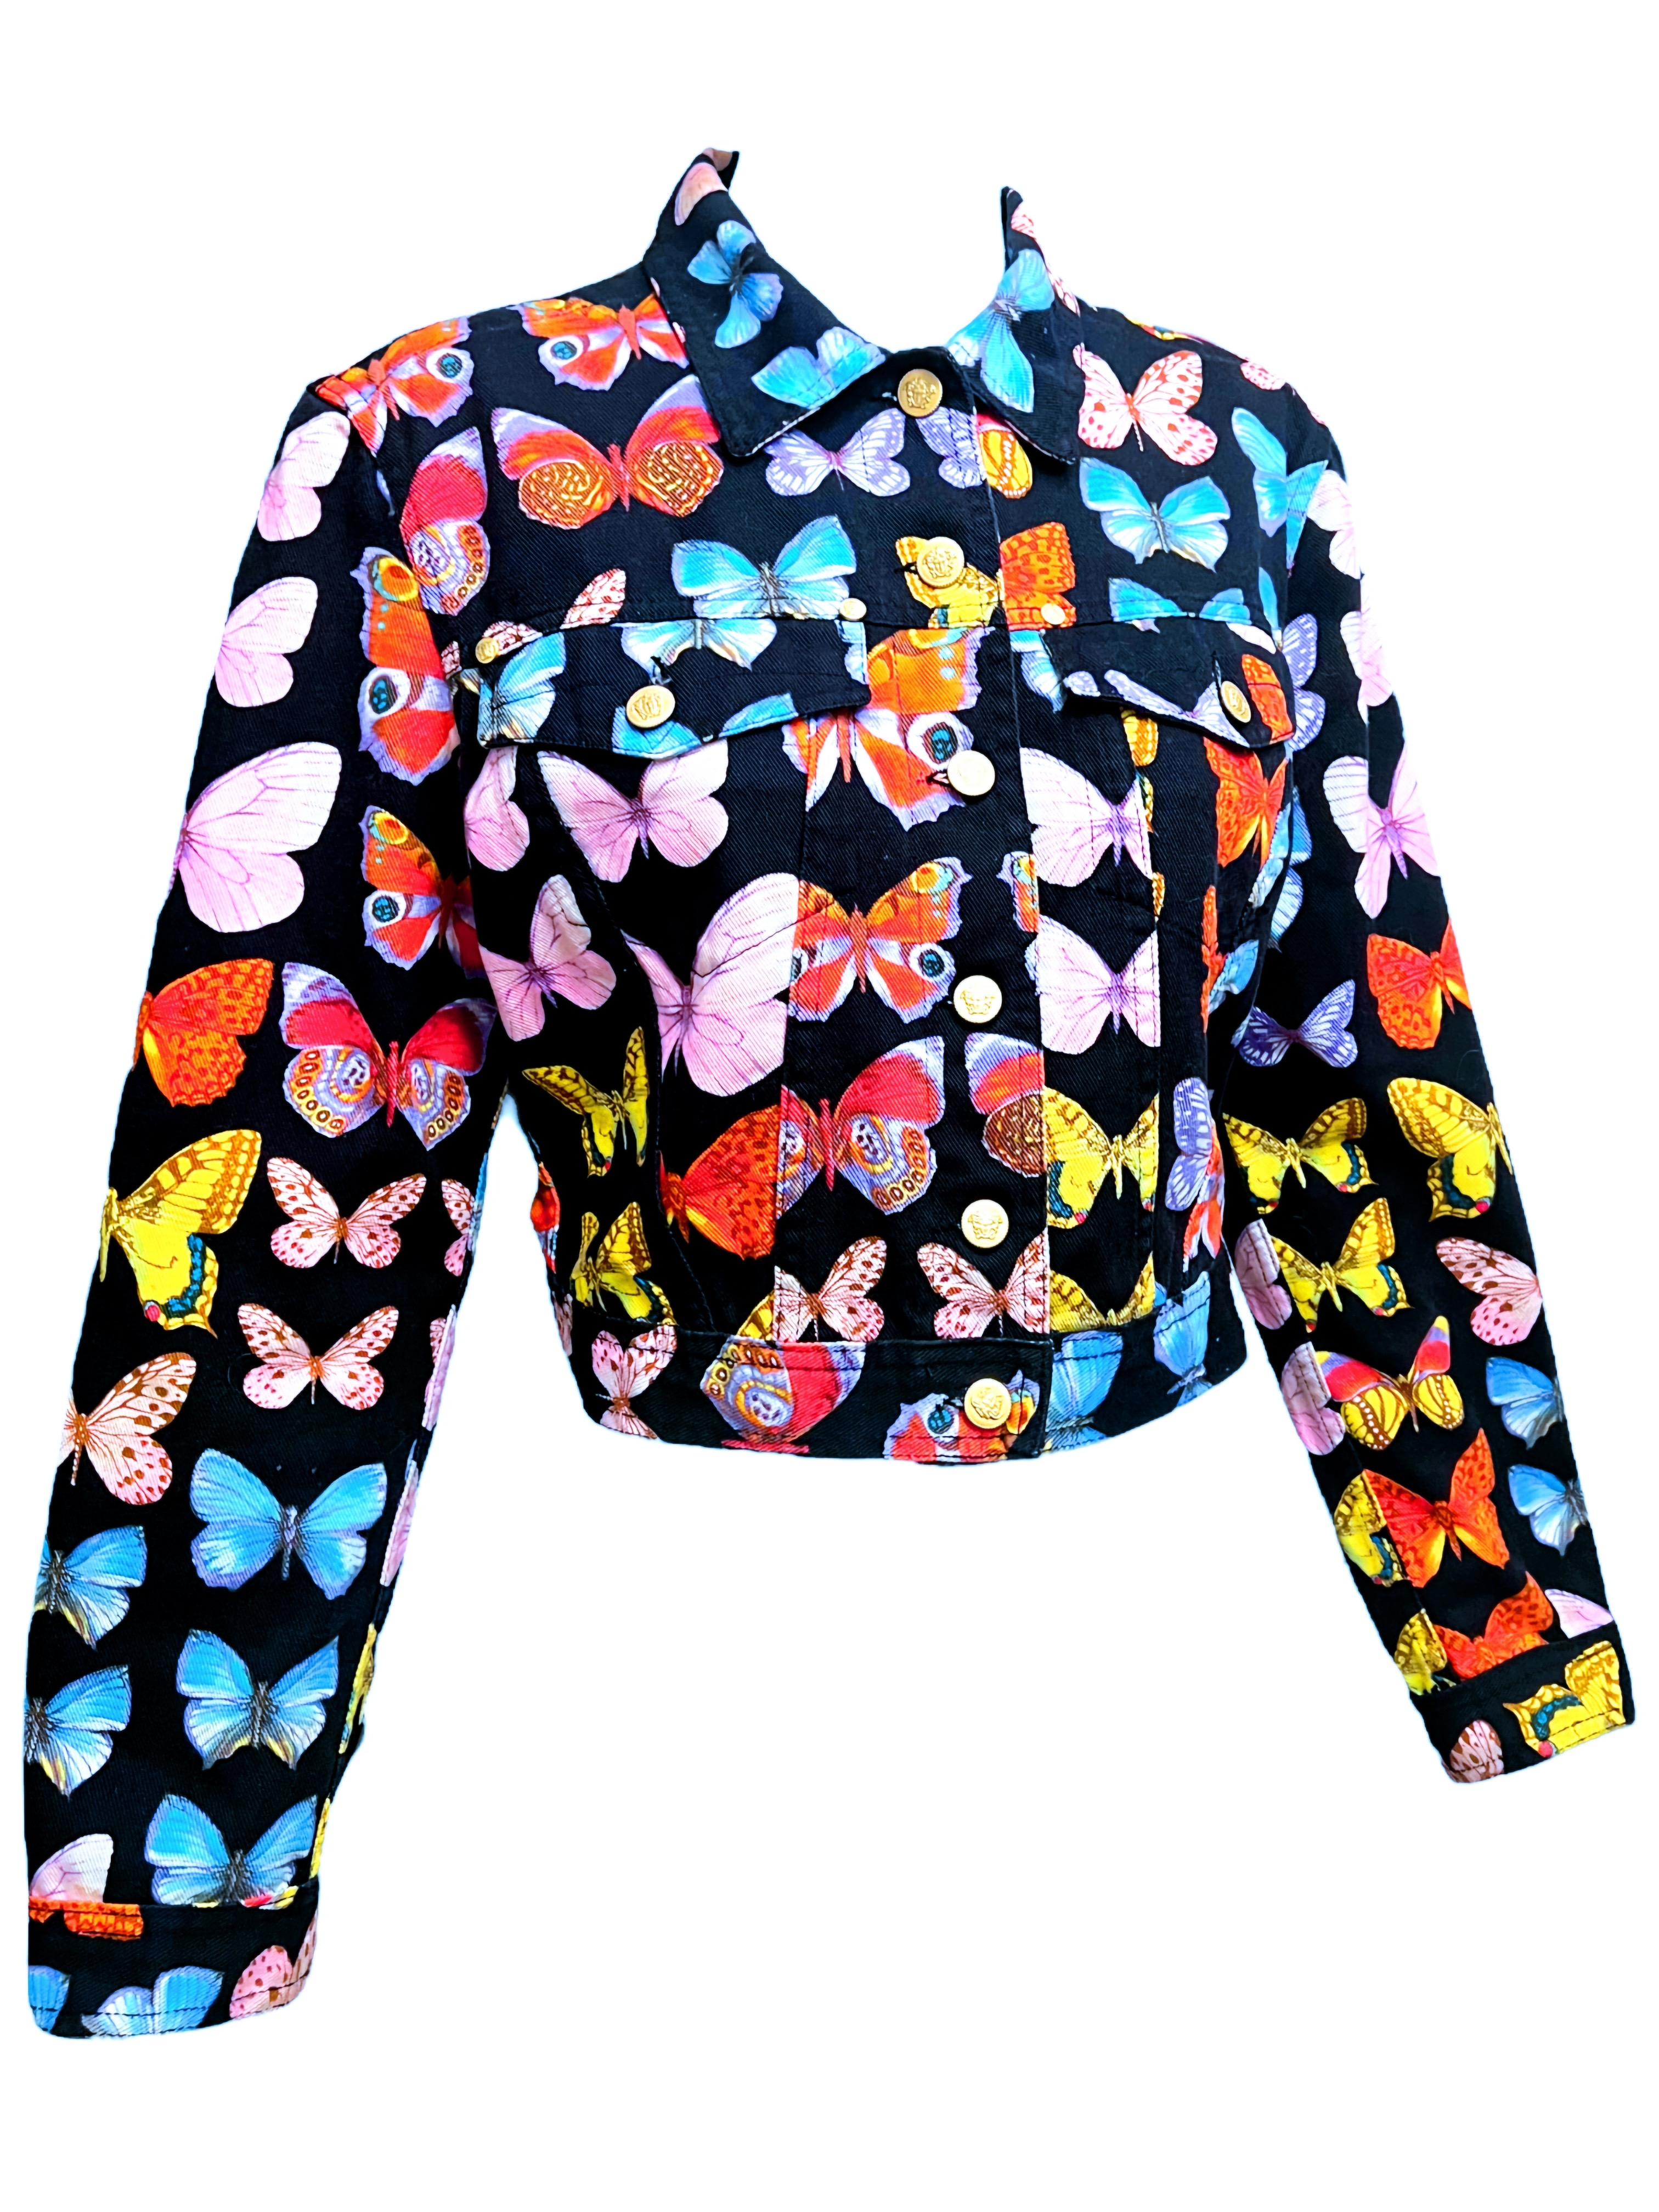 Versace butterfly printed jacket from Spring Summer 1995.

Black denim jacket printed with an energetic and vibrant butterfly motif throughout.
Gold Medusa buttons
Front chest pockets

Size: Small

Condition: Excellent condition. Light wear